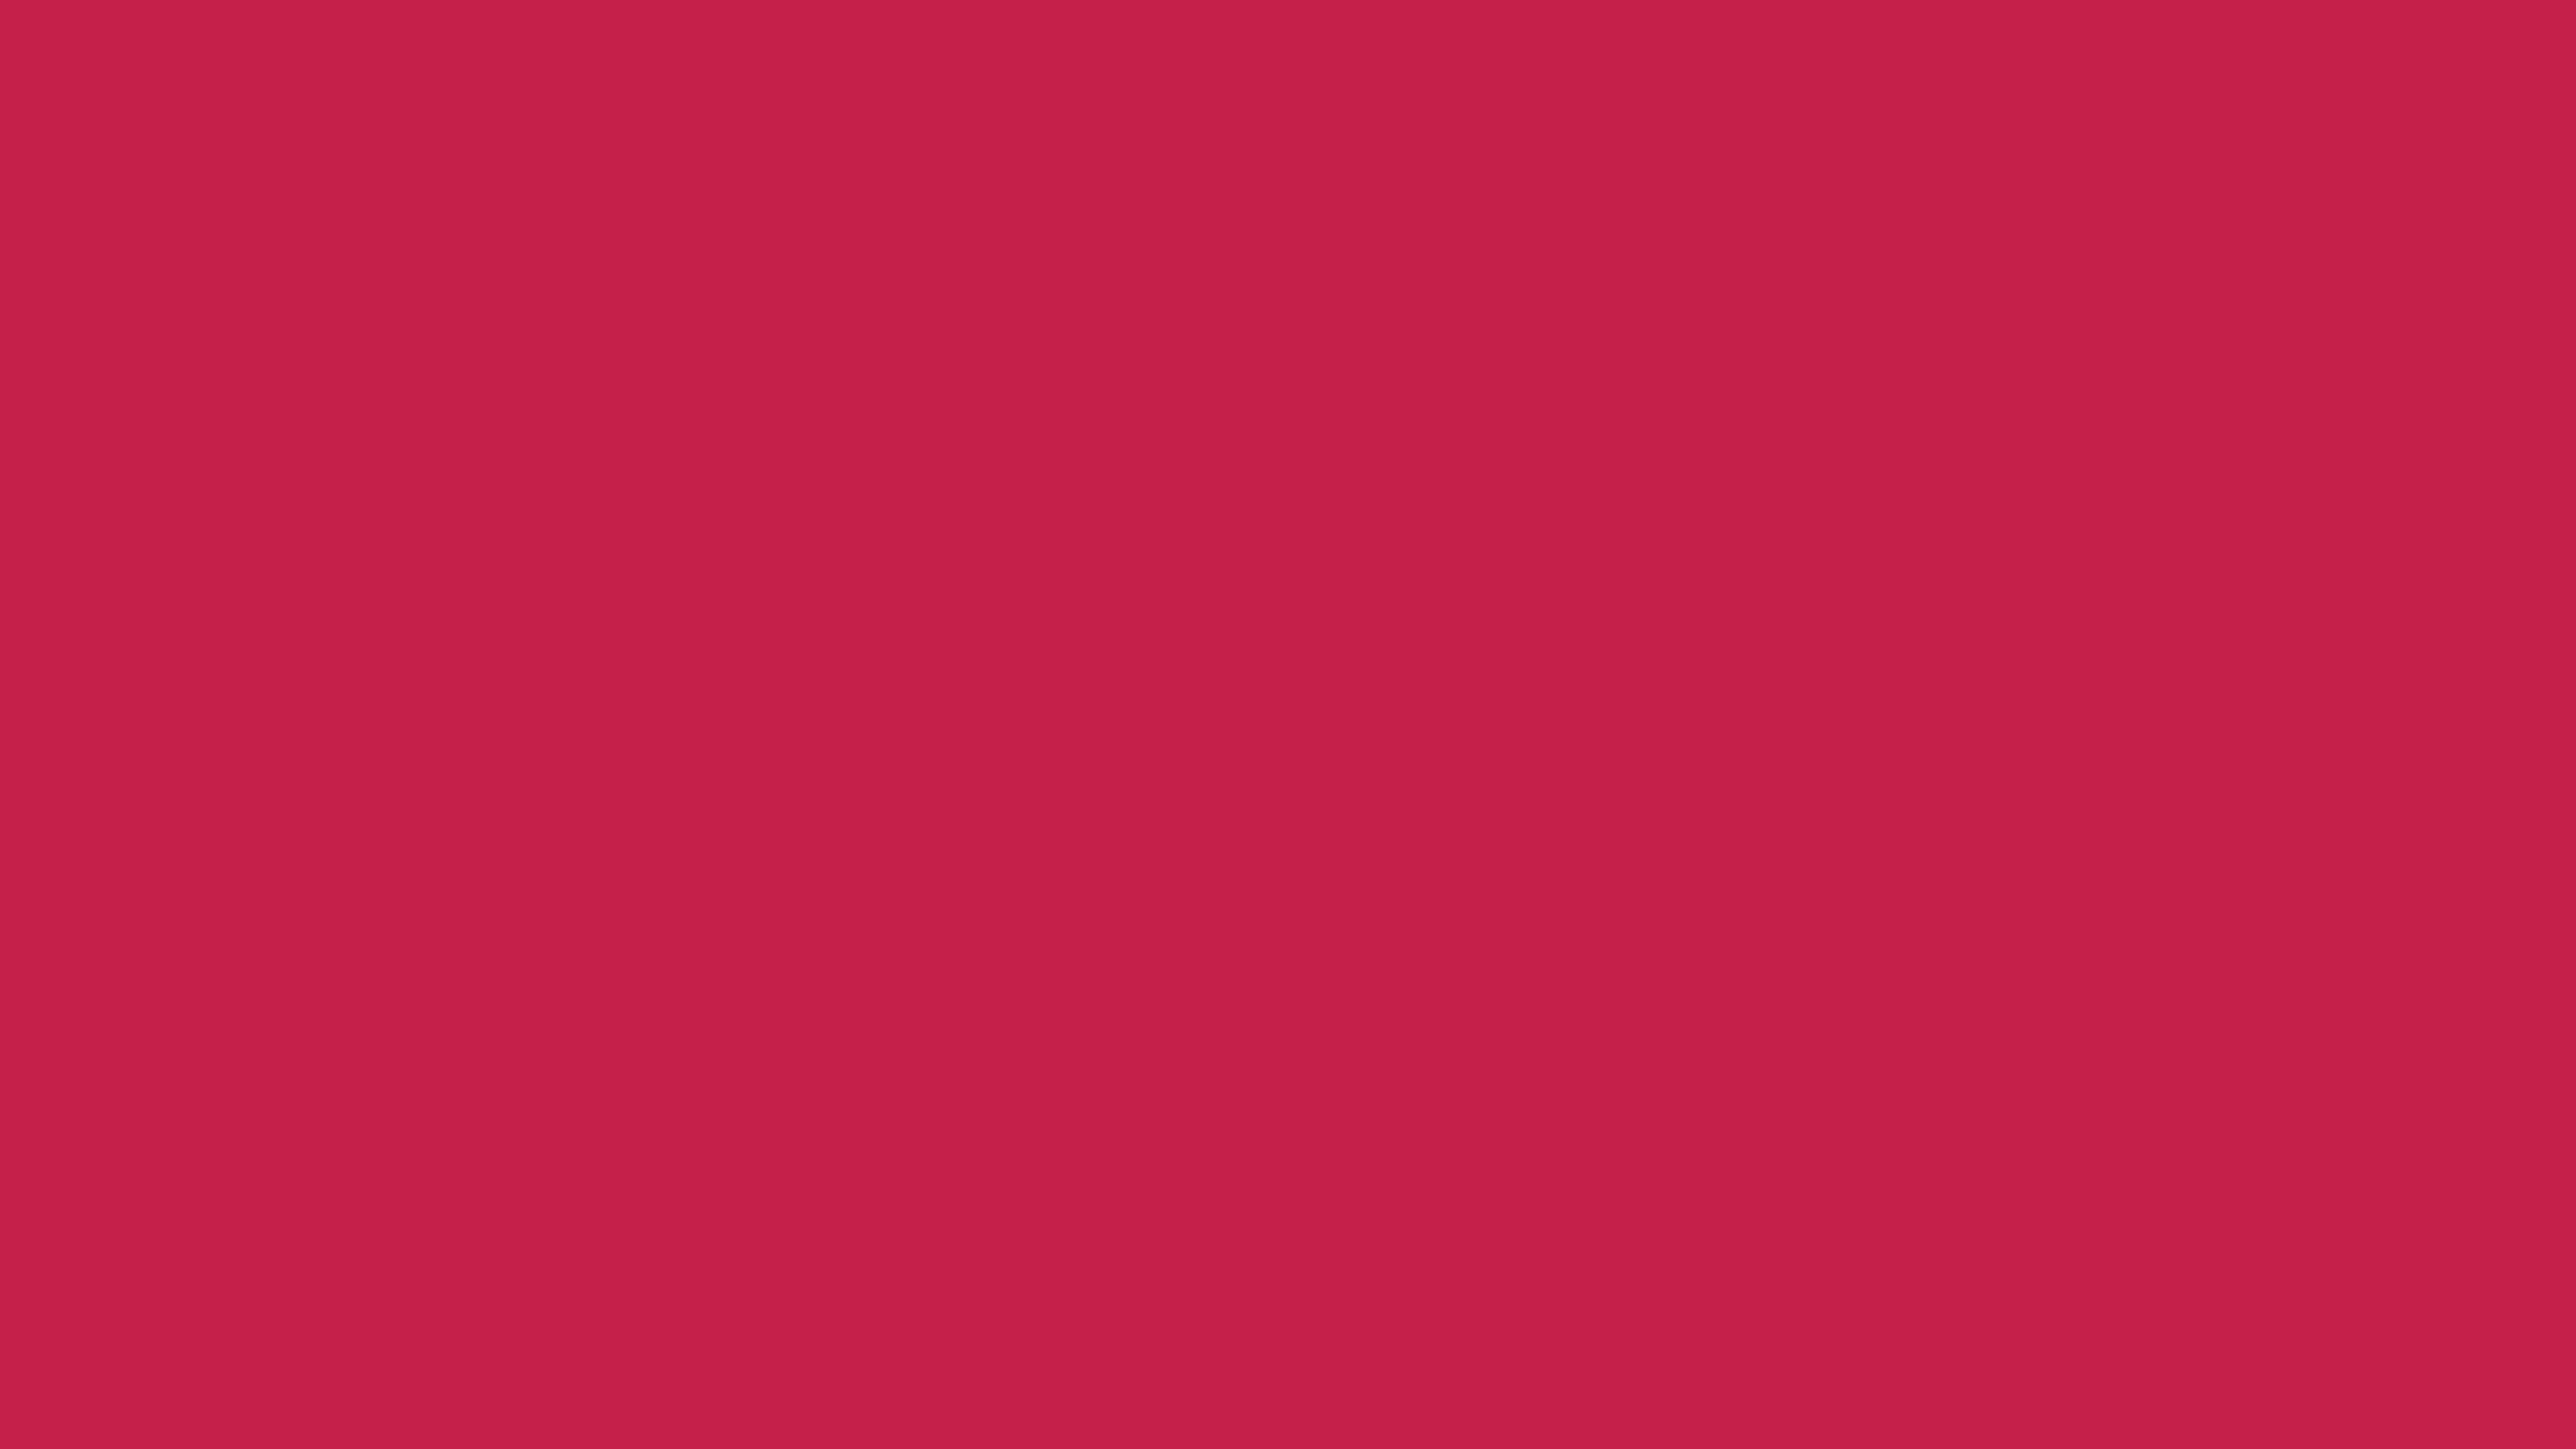 3840x2160 Bright Maroon Solid Color Background